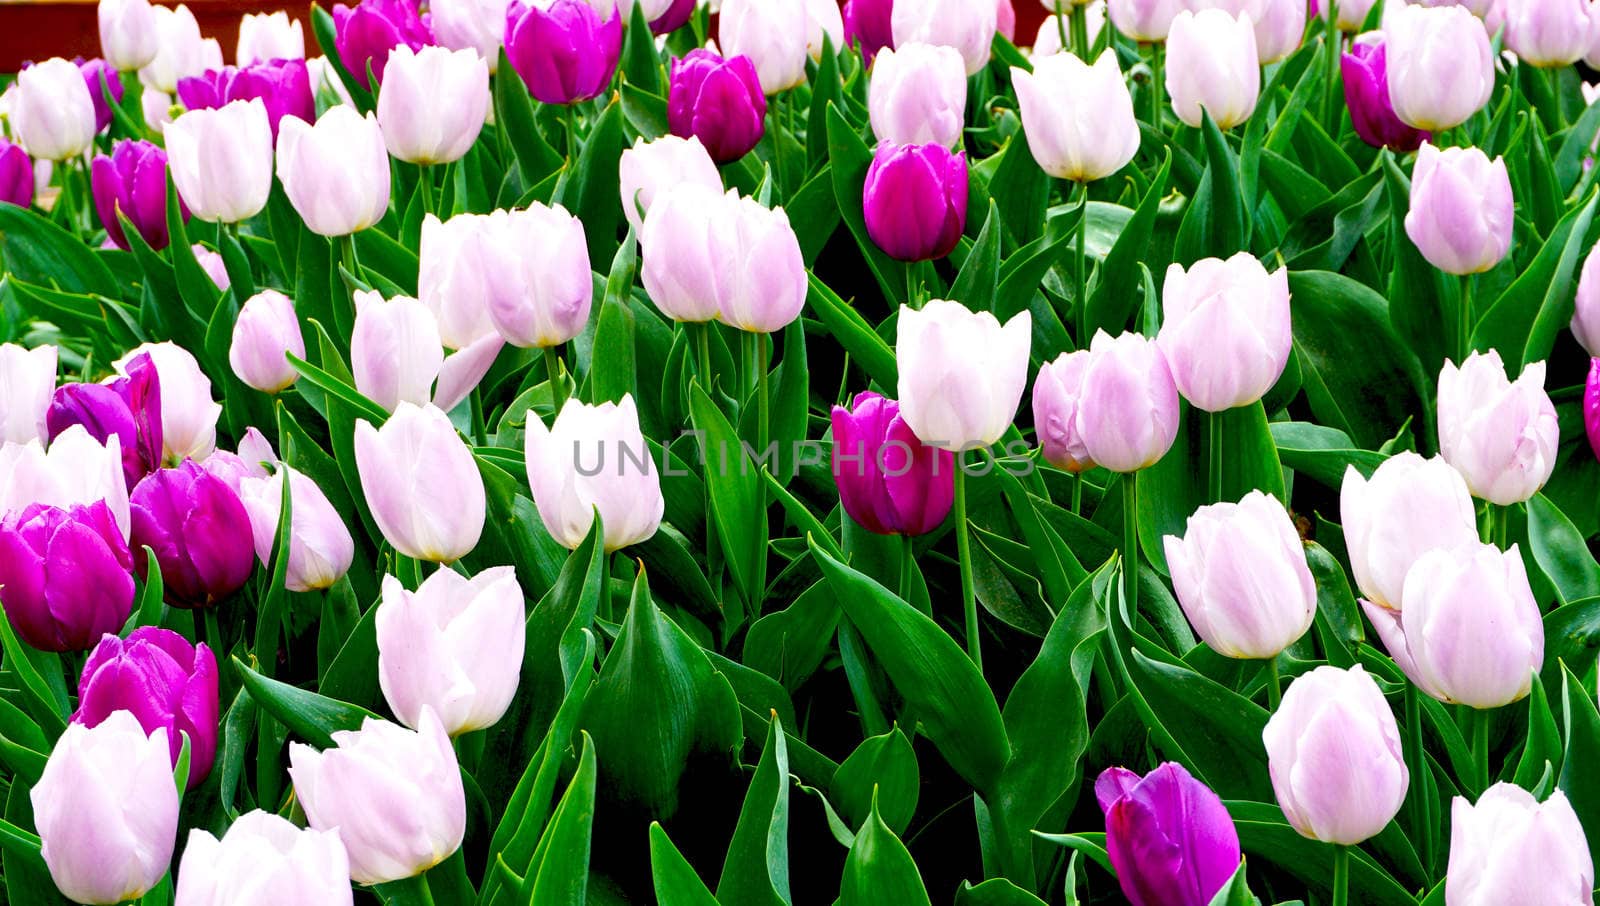 Pink and purple tulip flowers in the park by polarbearstudio